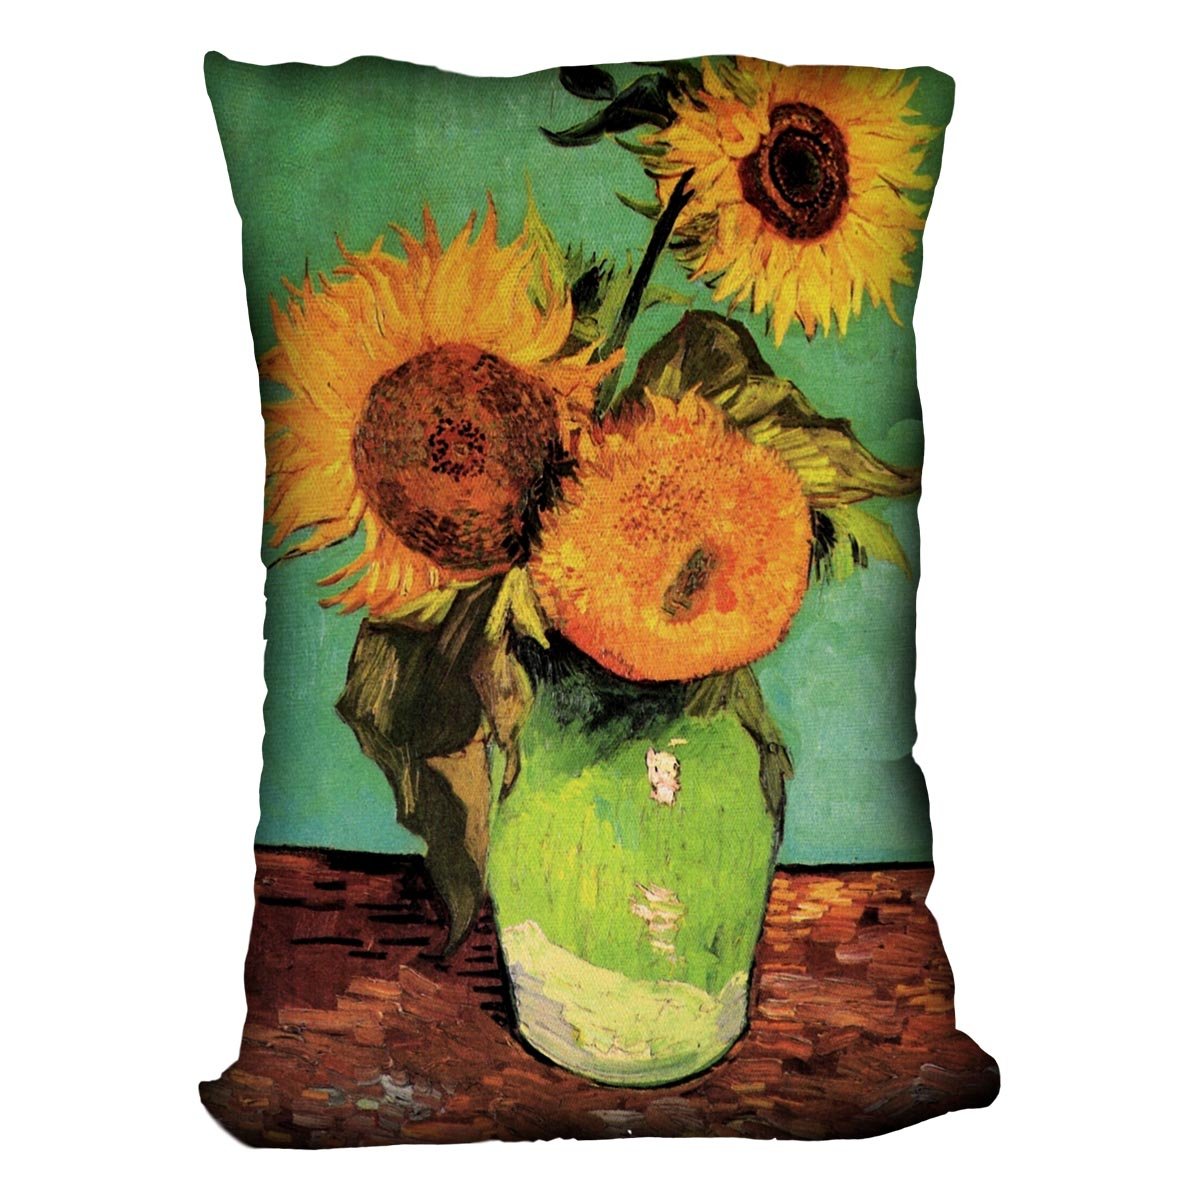 Three Sunflowers in a Vase by Van Gogh Throw Pillow